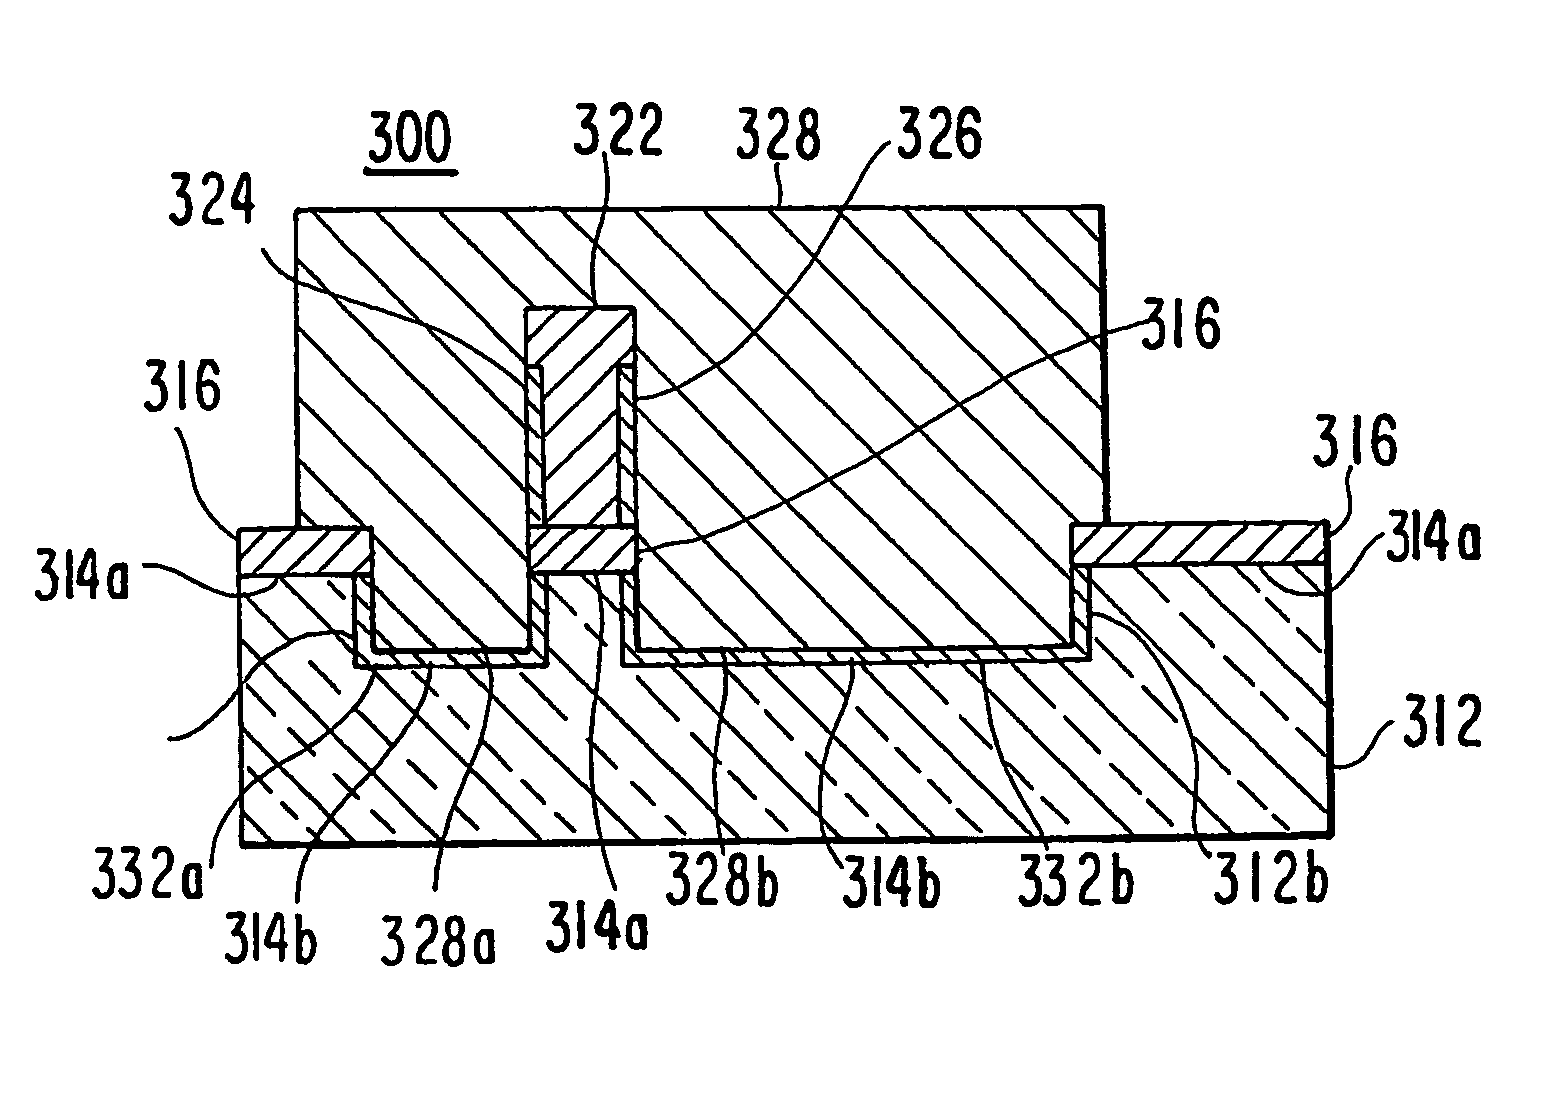 Semiconductor memory device with increased node capacitance